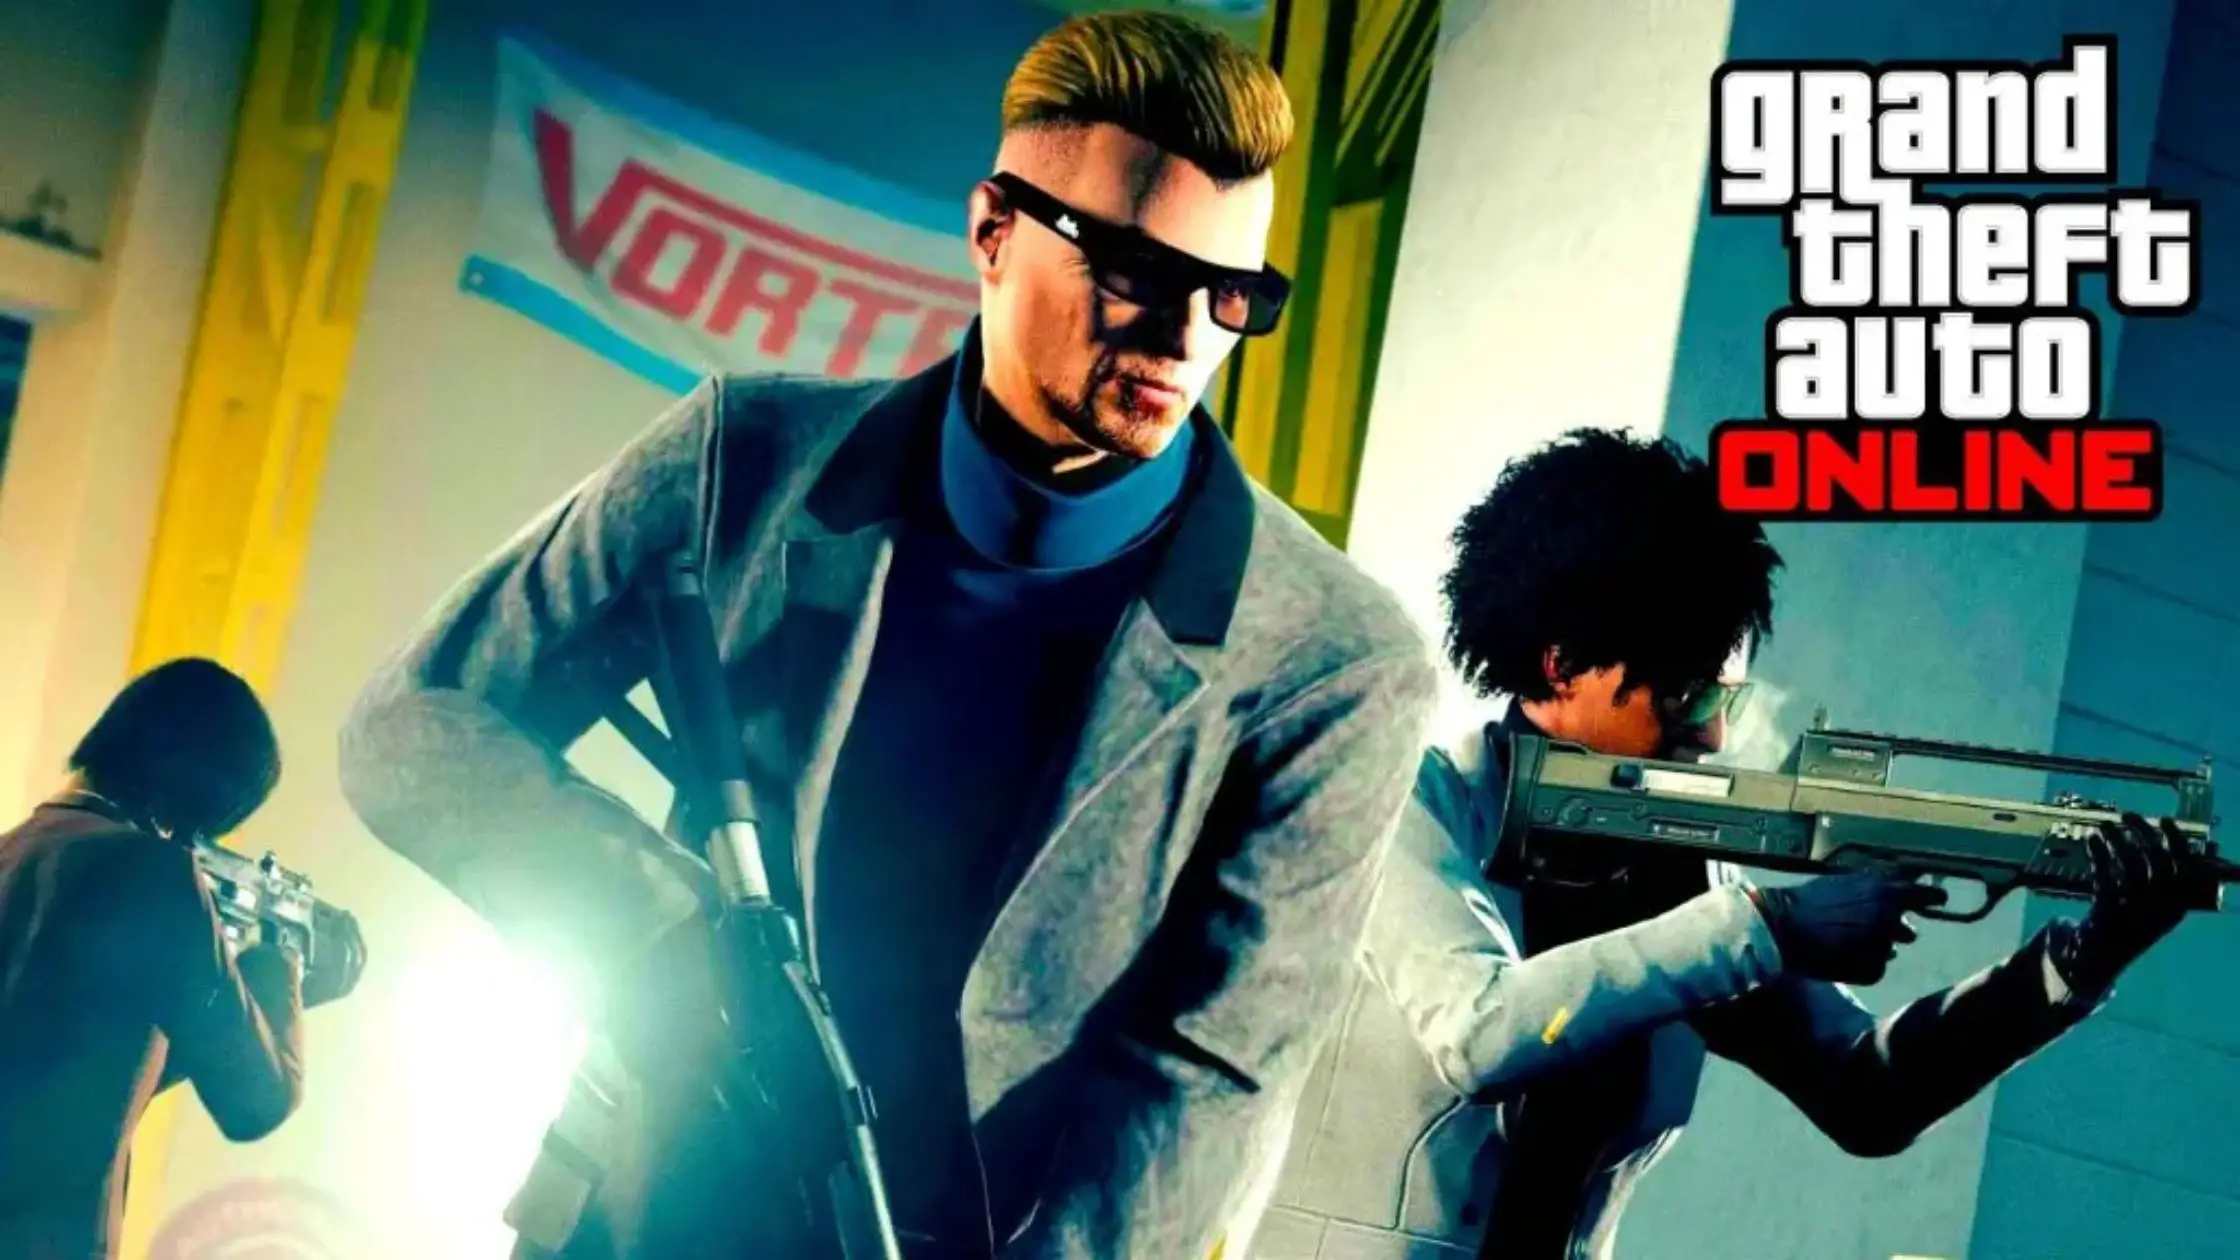 GTA Online Devs Tease Future DLCs and Updates What Could They Have in Store